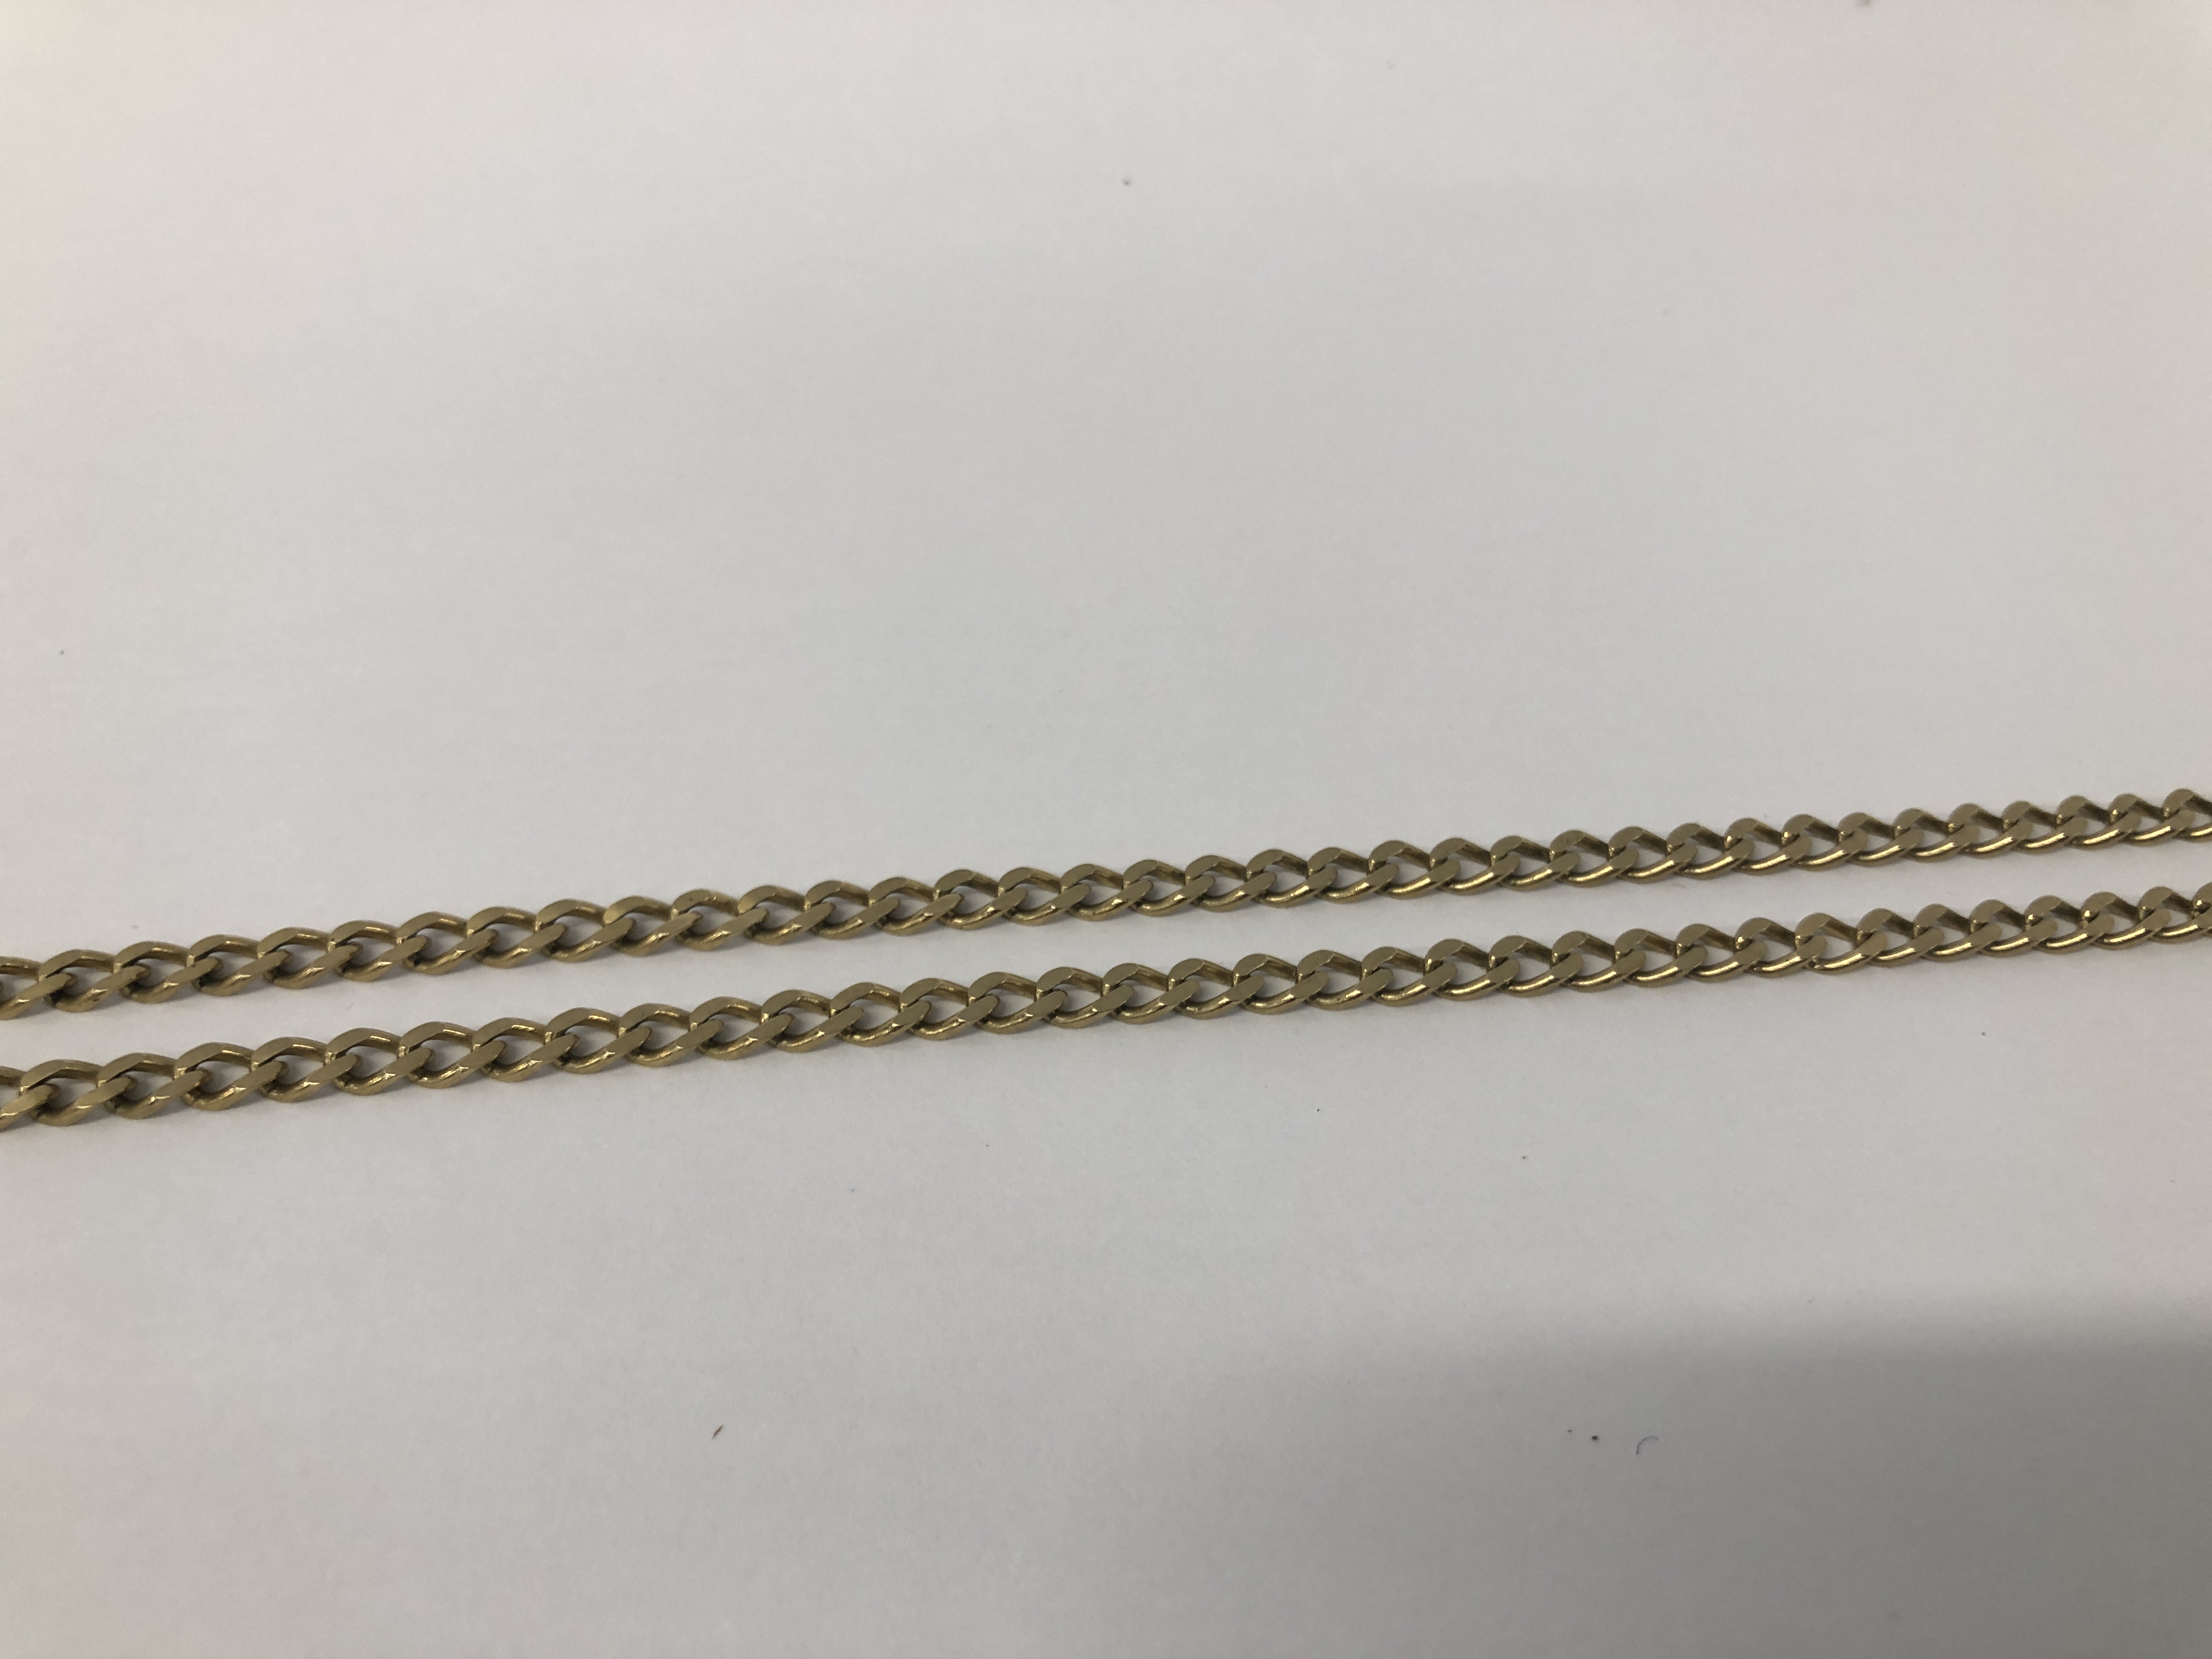 A 9CT GOLD CHAIN NECKLACE WITH FLAT OVAL LINKS, L 51CM. - Image 3 of 5